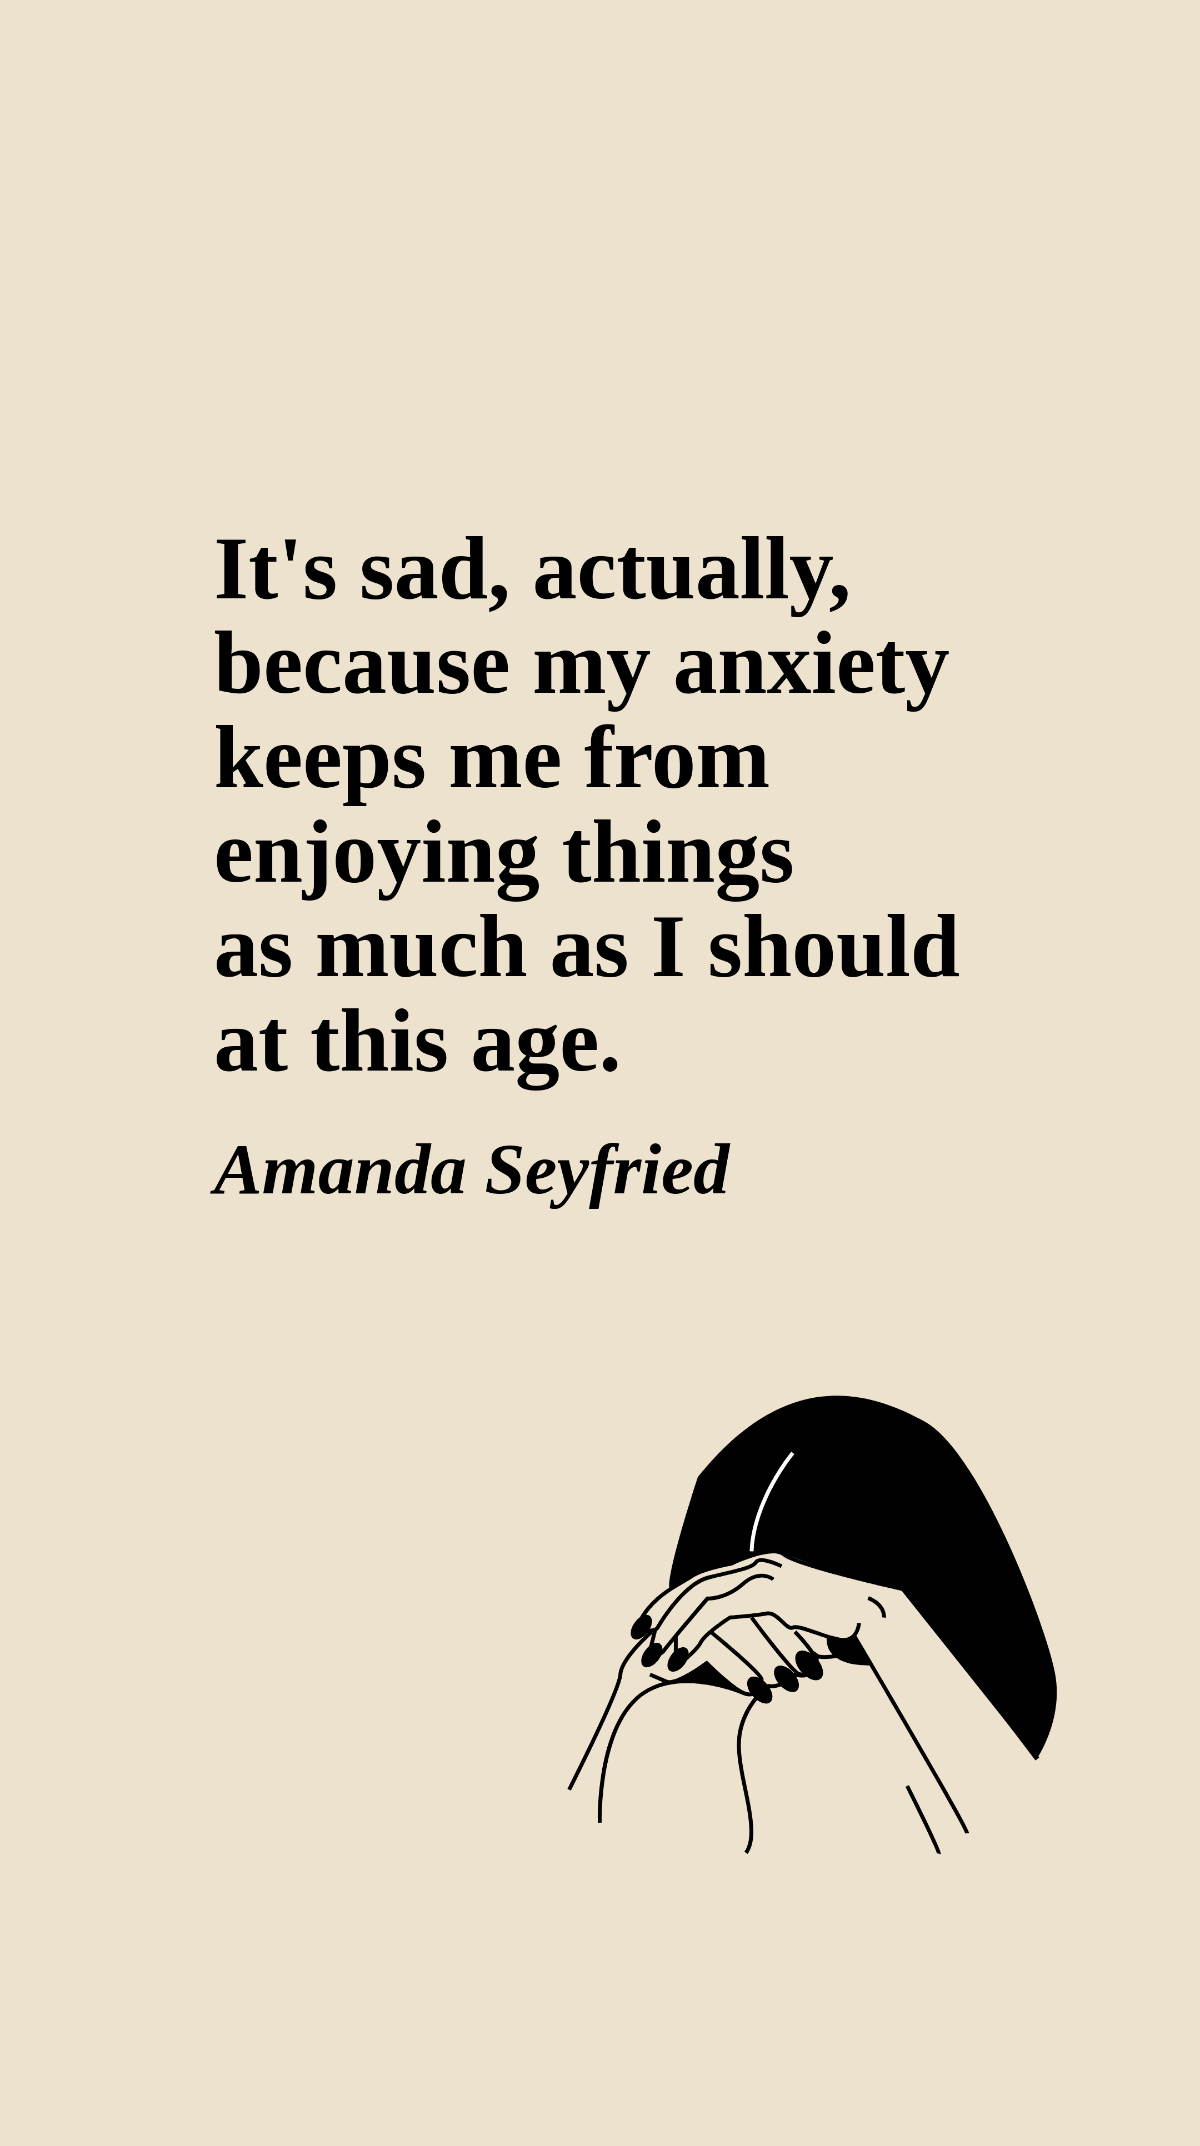 Free Amanda Seyfried - It's sad, actually, because my anxiety keeps me from enjoying things as much as I should at this age. Template